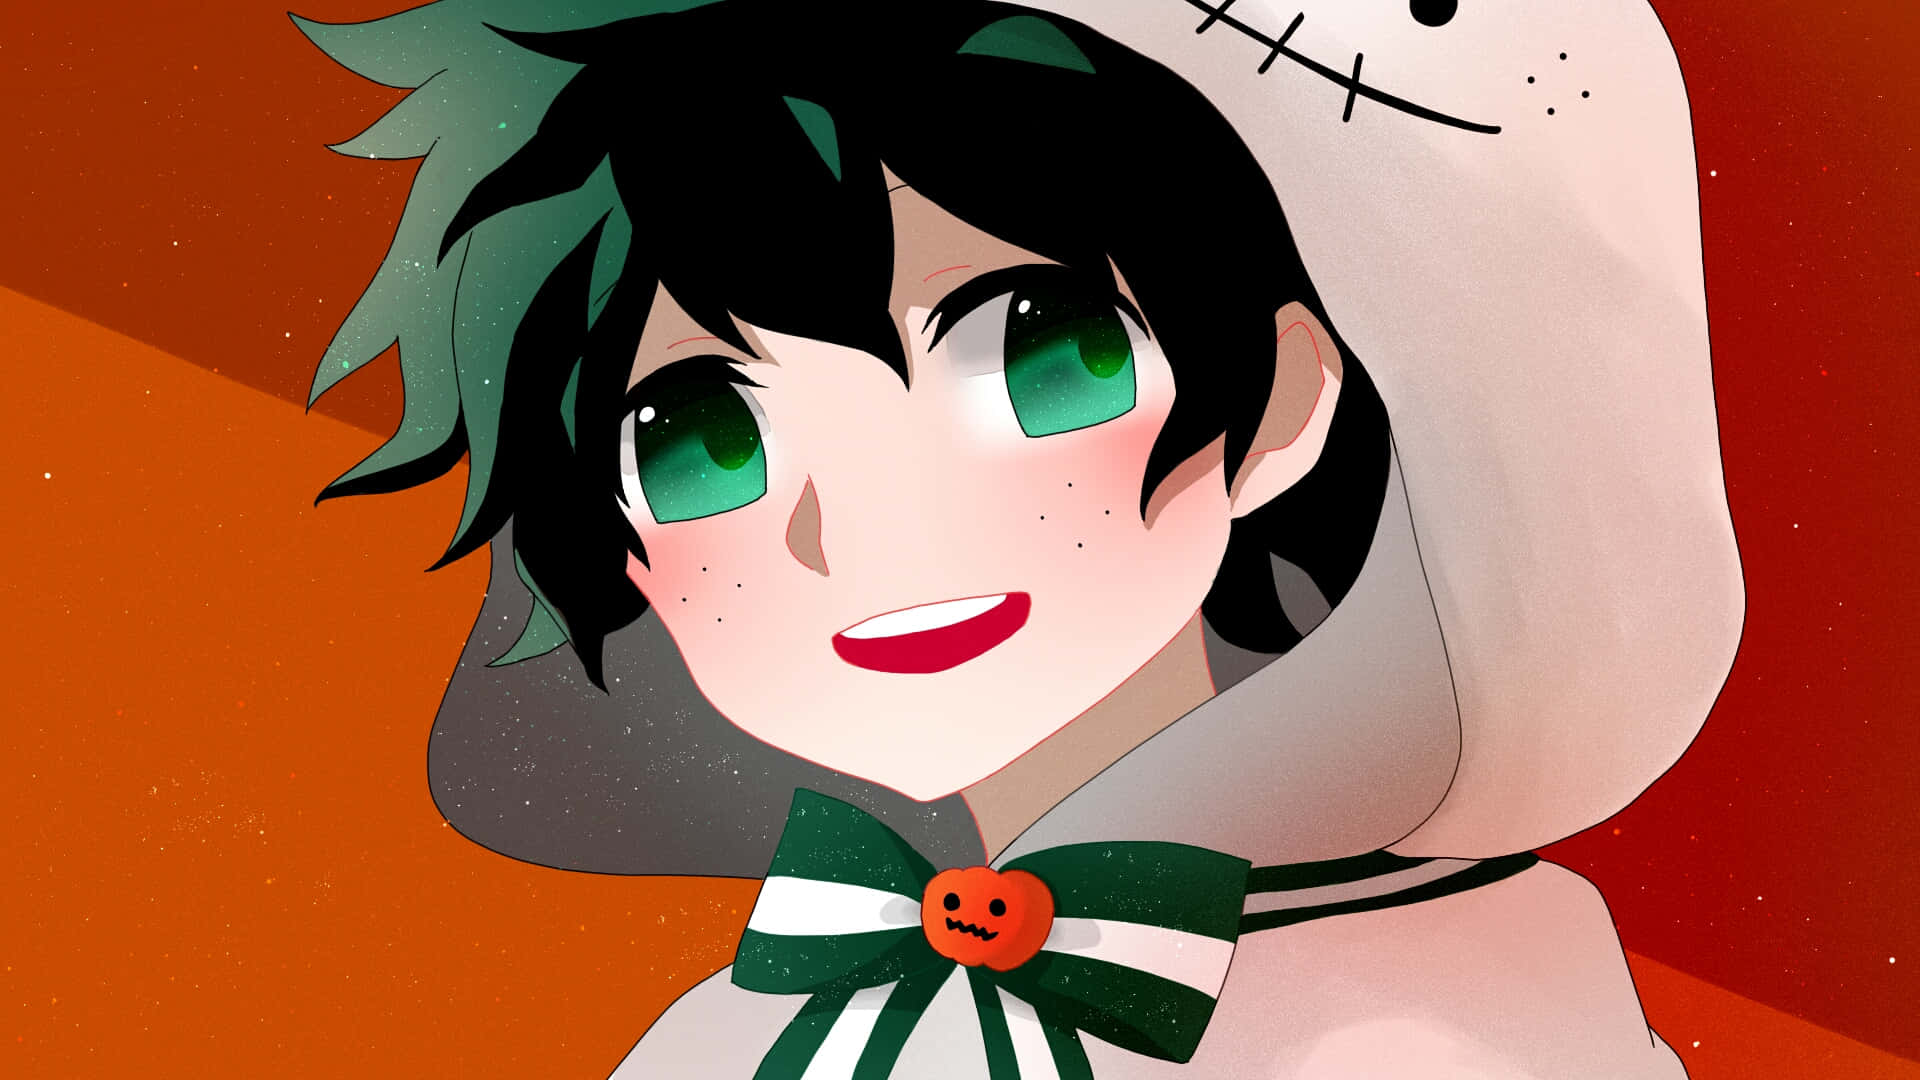 Kawaii Deku is an incredibly adorable imagined version of the popular fictional character; it's just too cute! Wallpaper